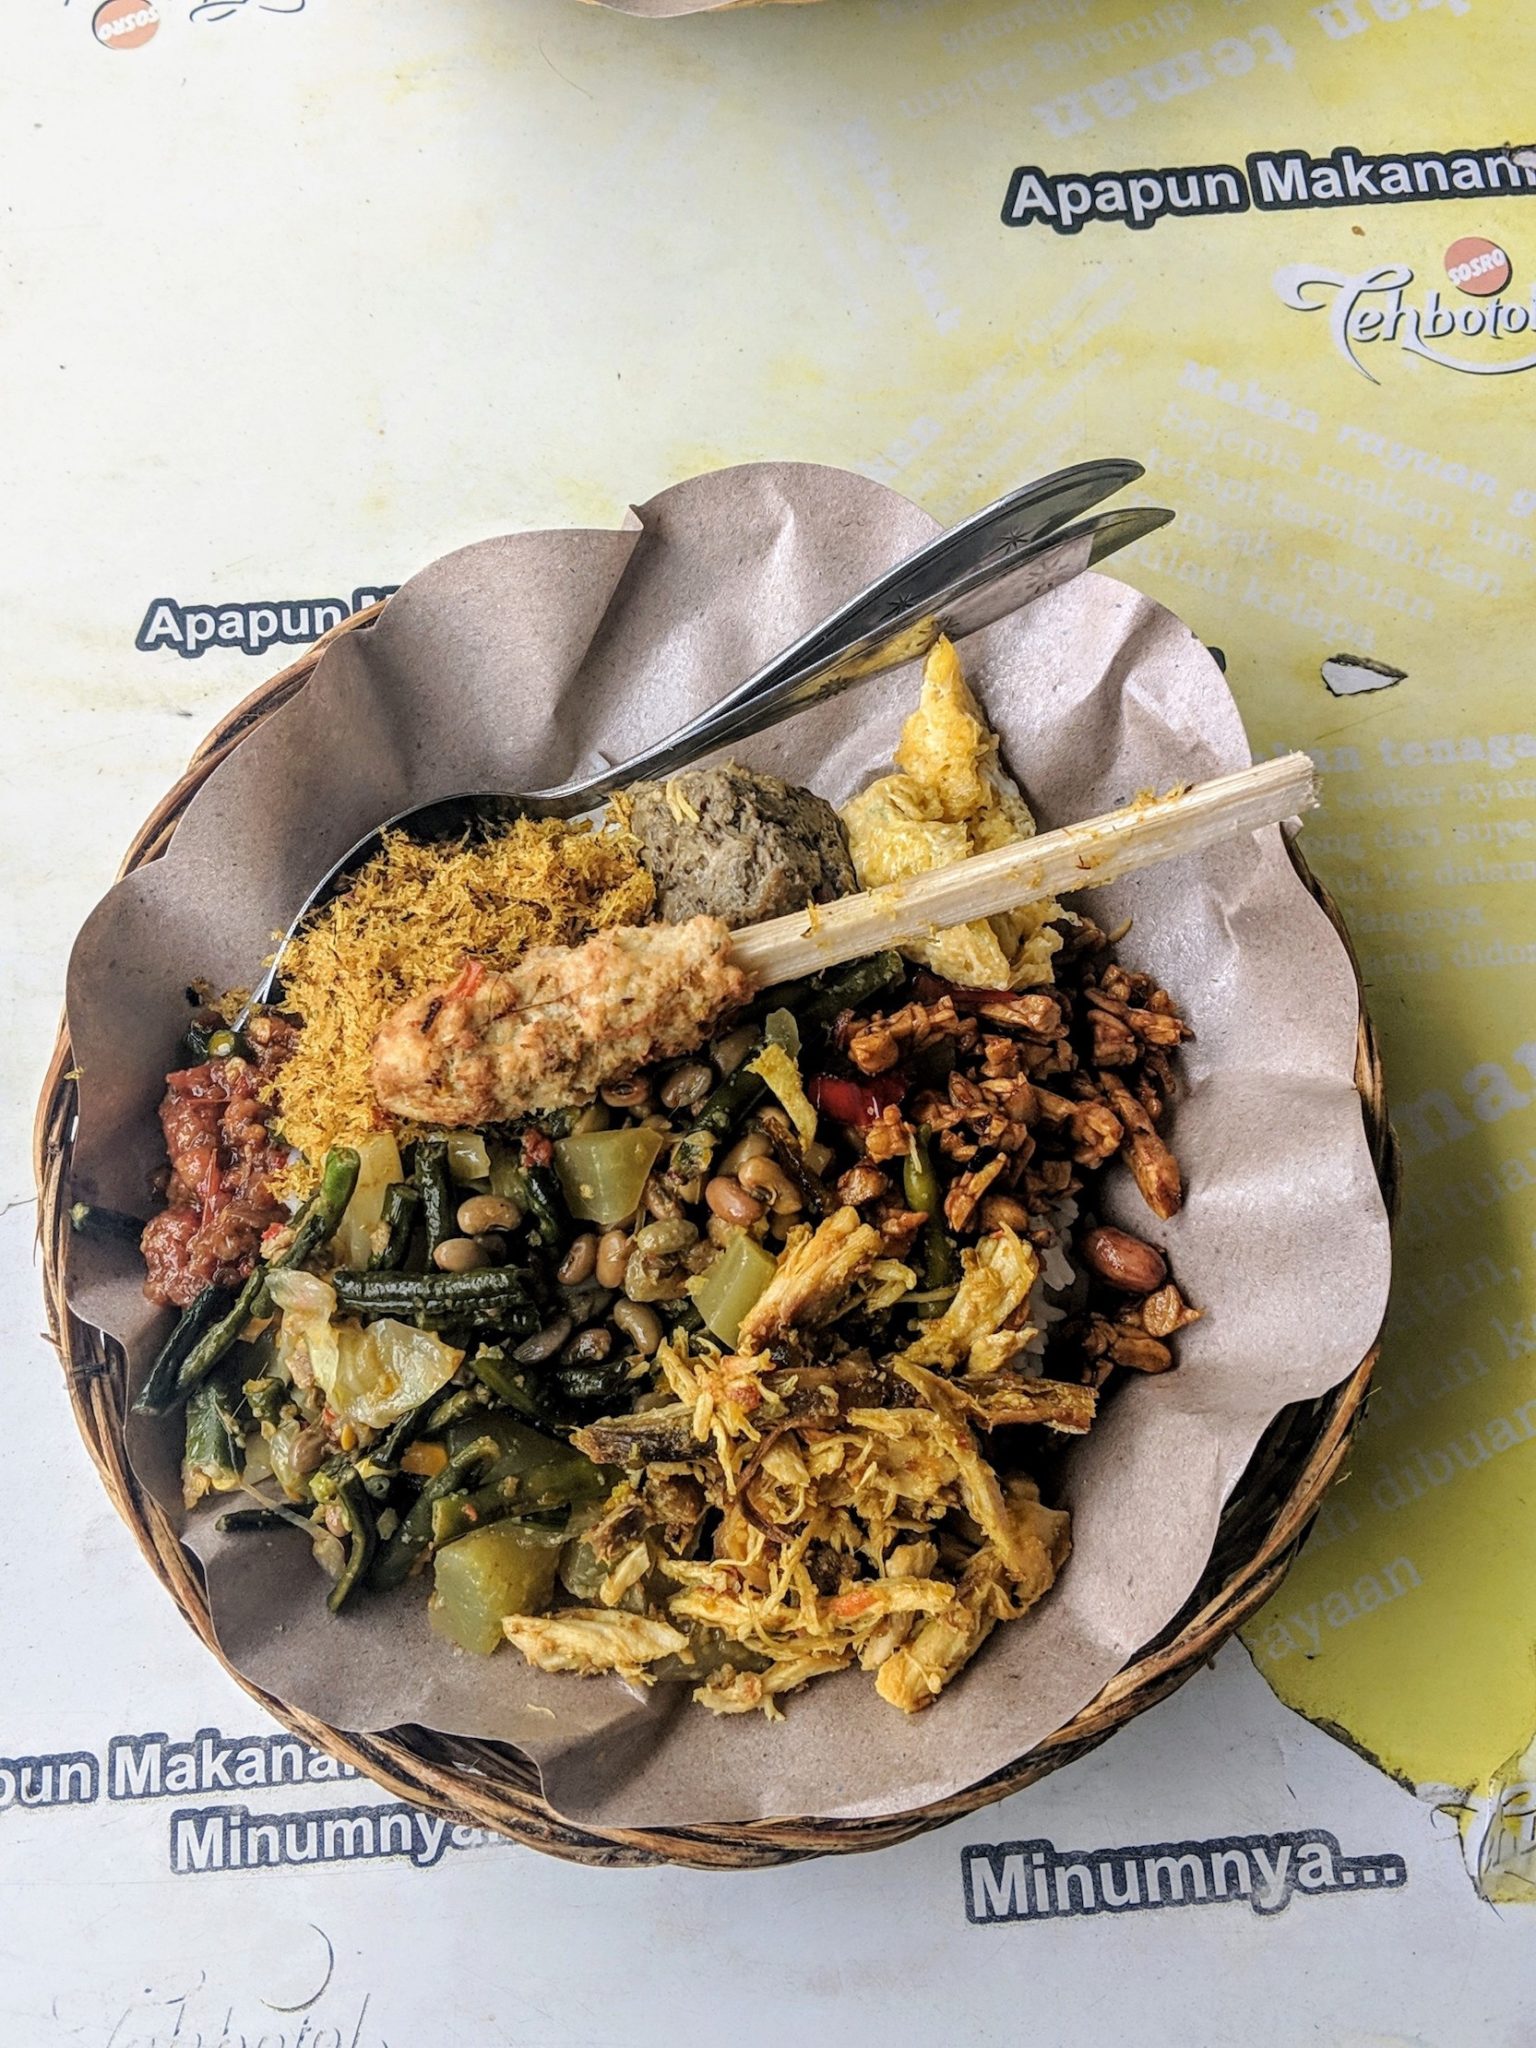 A dish of Nasi Campur - mixed rice dish with tempeh, veg, nuts and coconut shavings